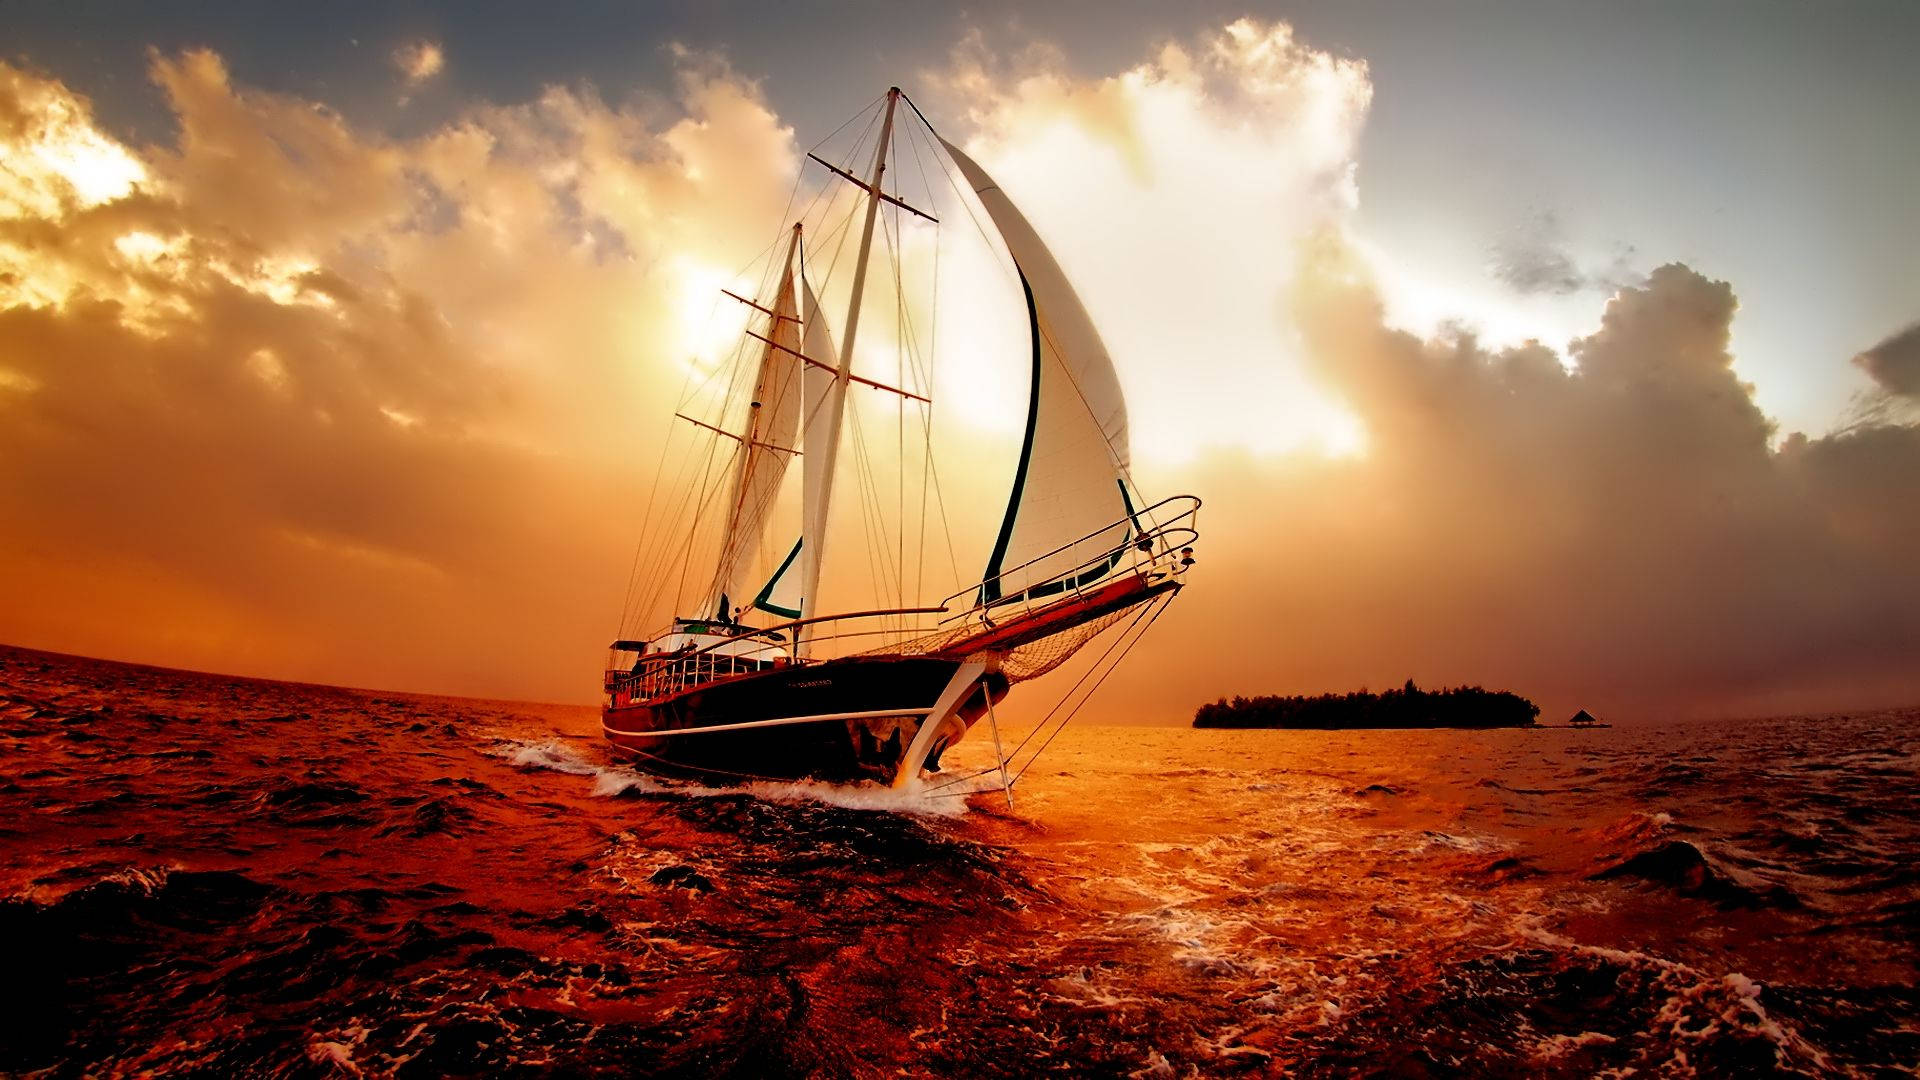 A beautiful ship silhouetted against a vibrant sunset Wallpaper